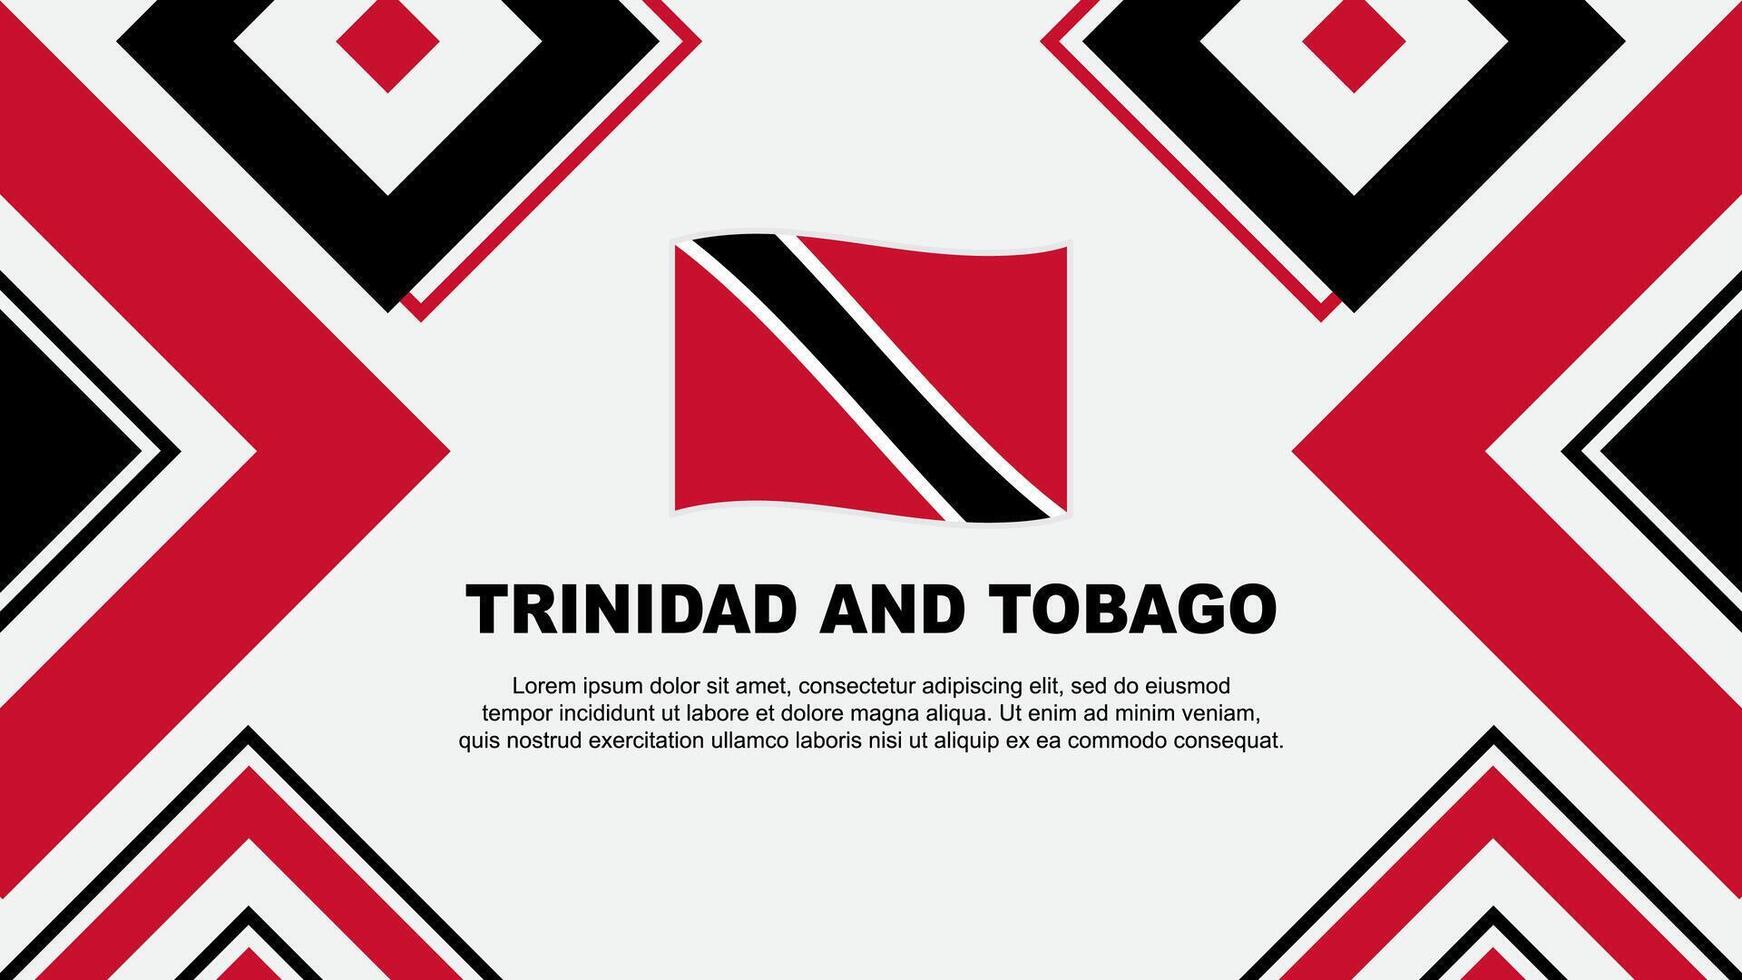 Trinidad And Tobago Flag Abstract Background Design Template. Trinidad And Tobago Independence Day Banner Wallpaper Vector Illustration. Trinidad And Tobago Independence